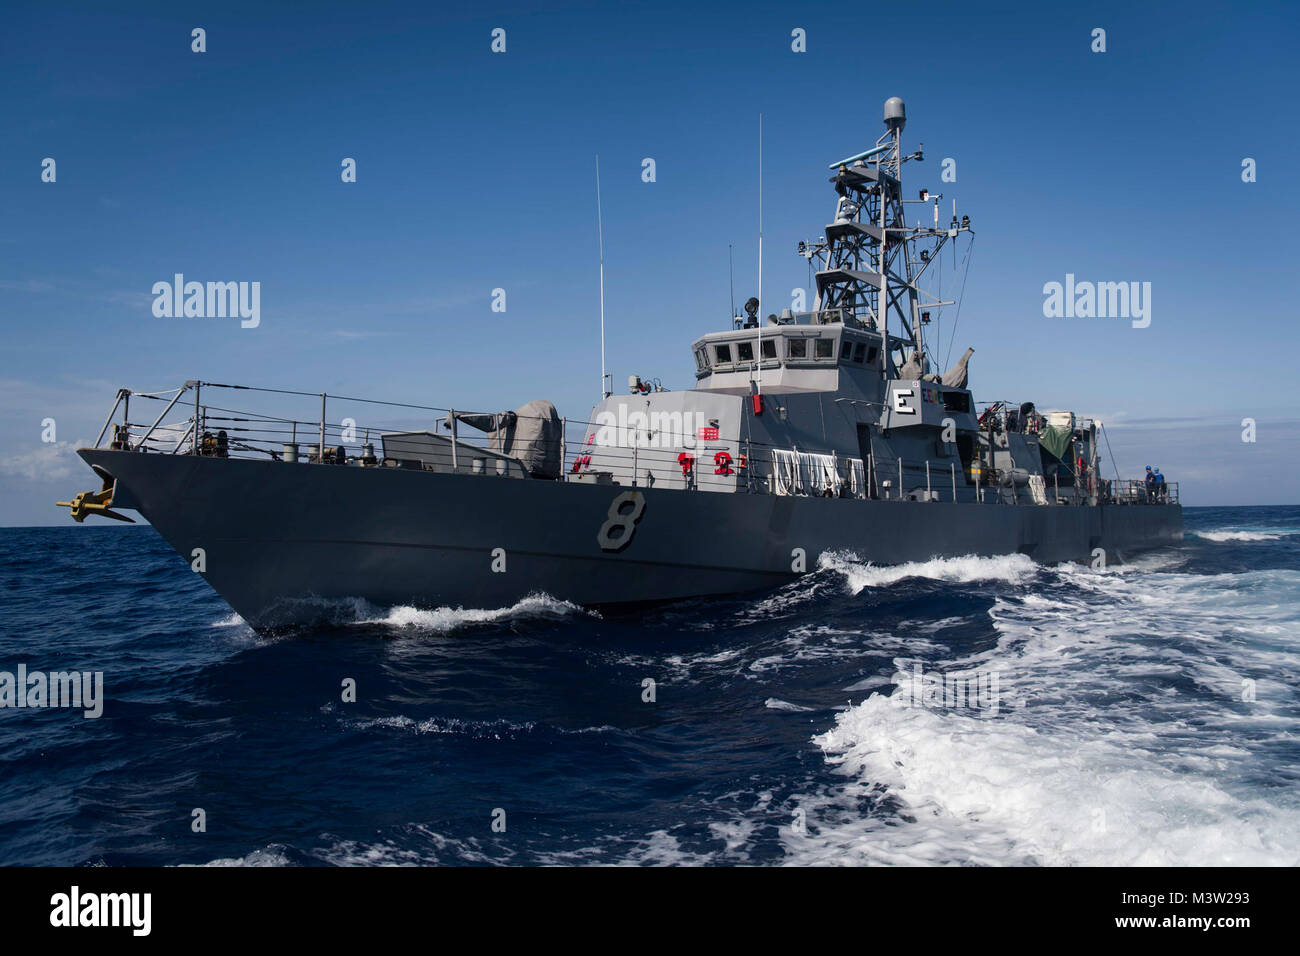 170421-N-EO381-174 CARIBBEAN SEA (April 21, 2017) - The Cyclone-class patrol coastal ship USS Zephyr (PC 8) transits the Caribbean Sea. Zephyr is currently underway in support of Operation Martillo, a joint operation with the U.S. Coast Guard and partner nations, within the U.S. 4th Fleet area of operations. (U.S. Navy photo by Mass Communication Specialist 3rd Class Casey J. Hopkins/Released) 170421-N-EO381-174 by U.S. Naval Forces Southern Command  U.S. 4th Fleet Stock Photo